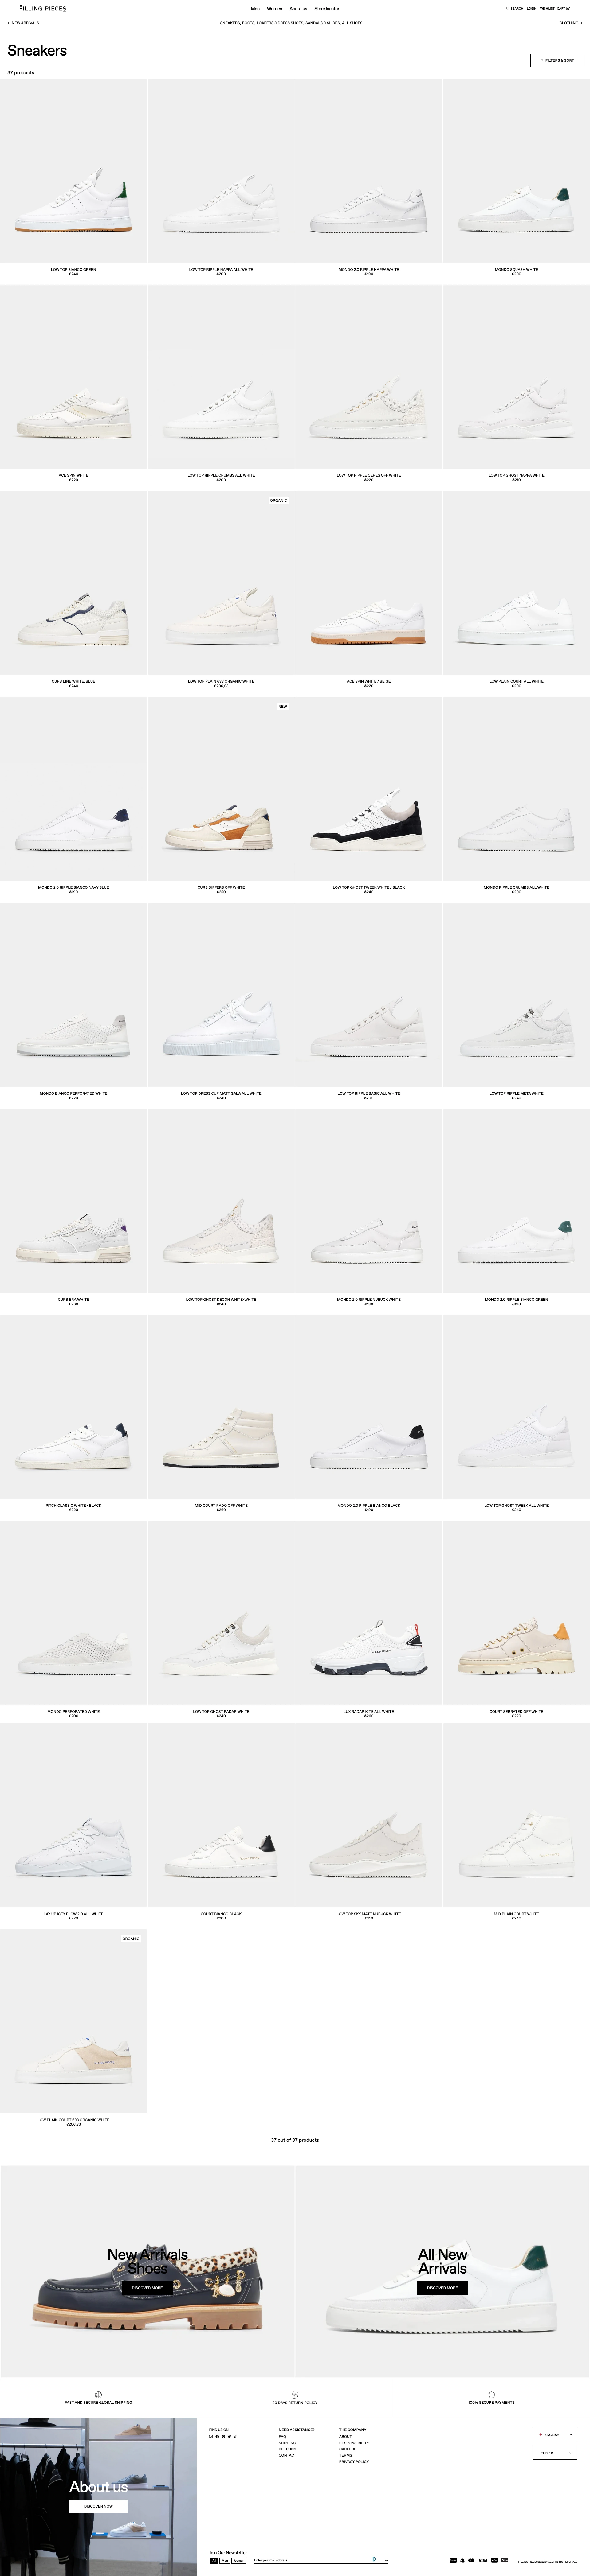 Filling Pieces Landing Page Example: Filling Pieces is an Amsterdam-based fashion brand bridging the gap between streetwear and high fashion